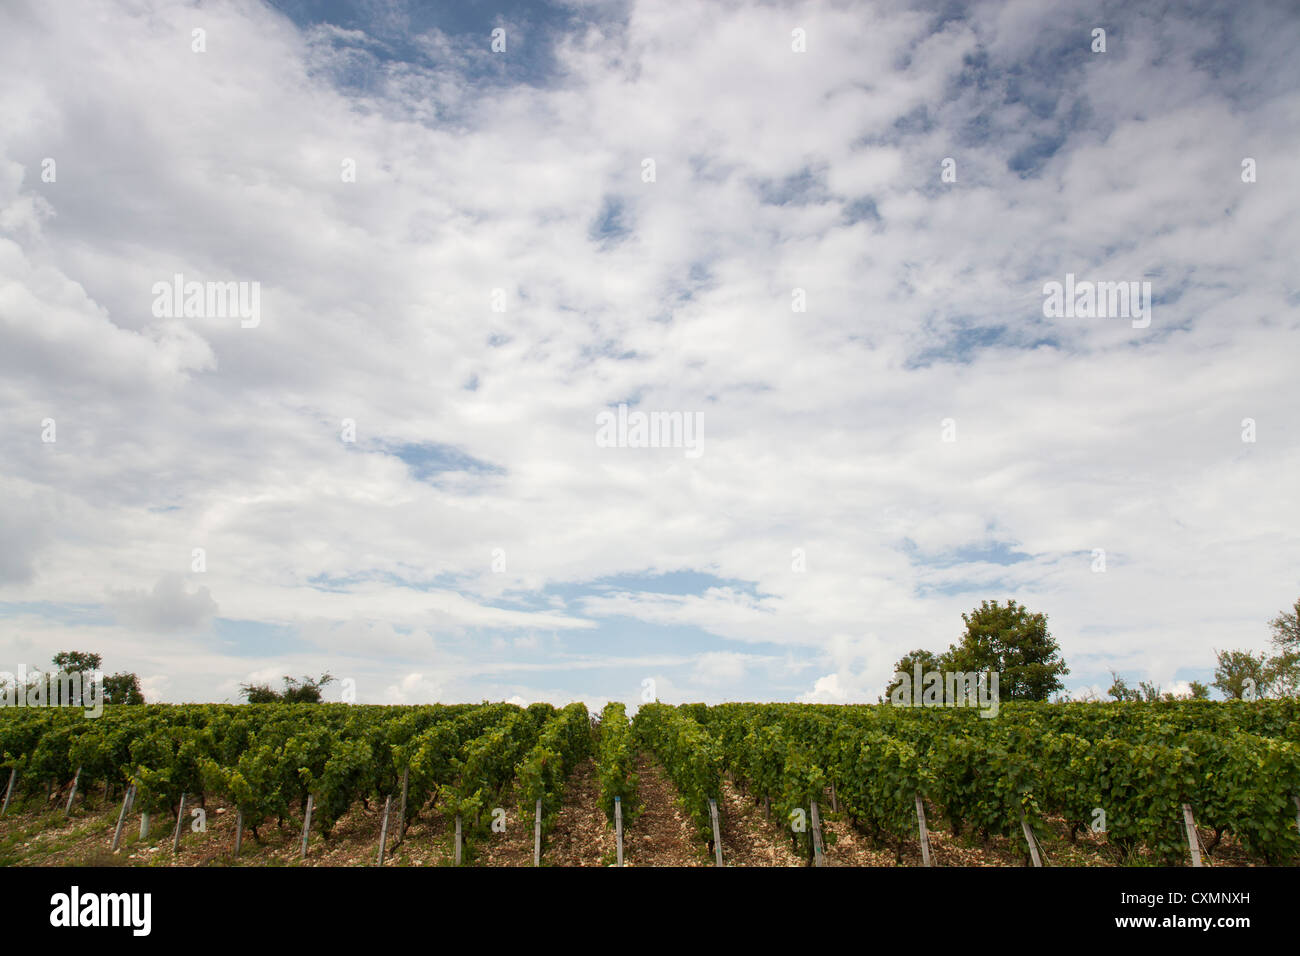 Rows of vines under a big sky Stock Photo